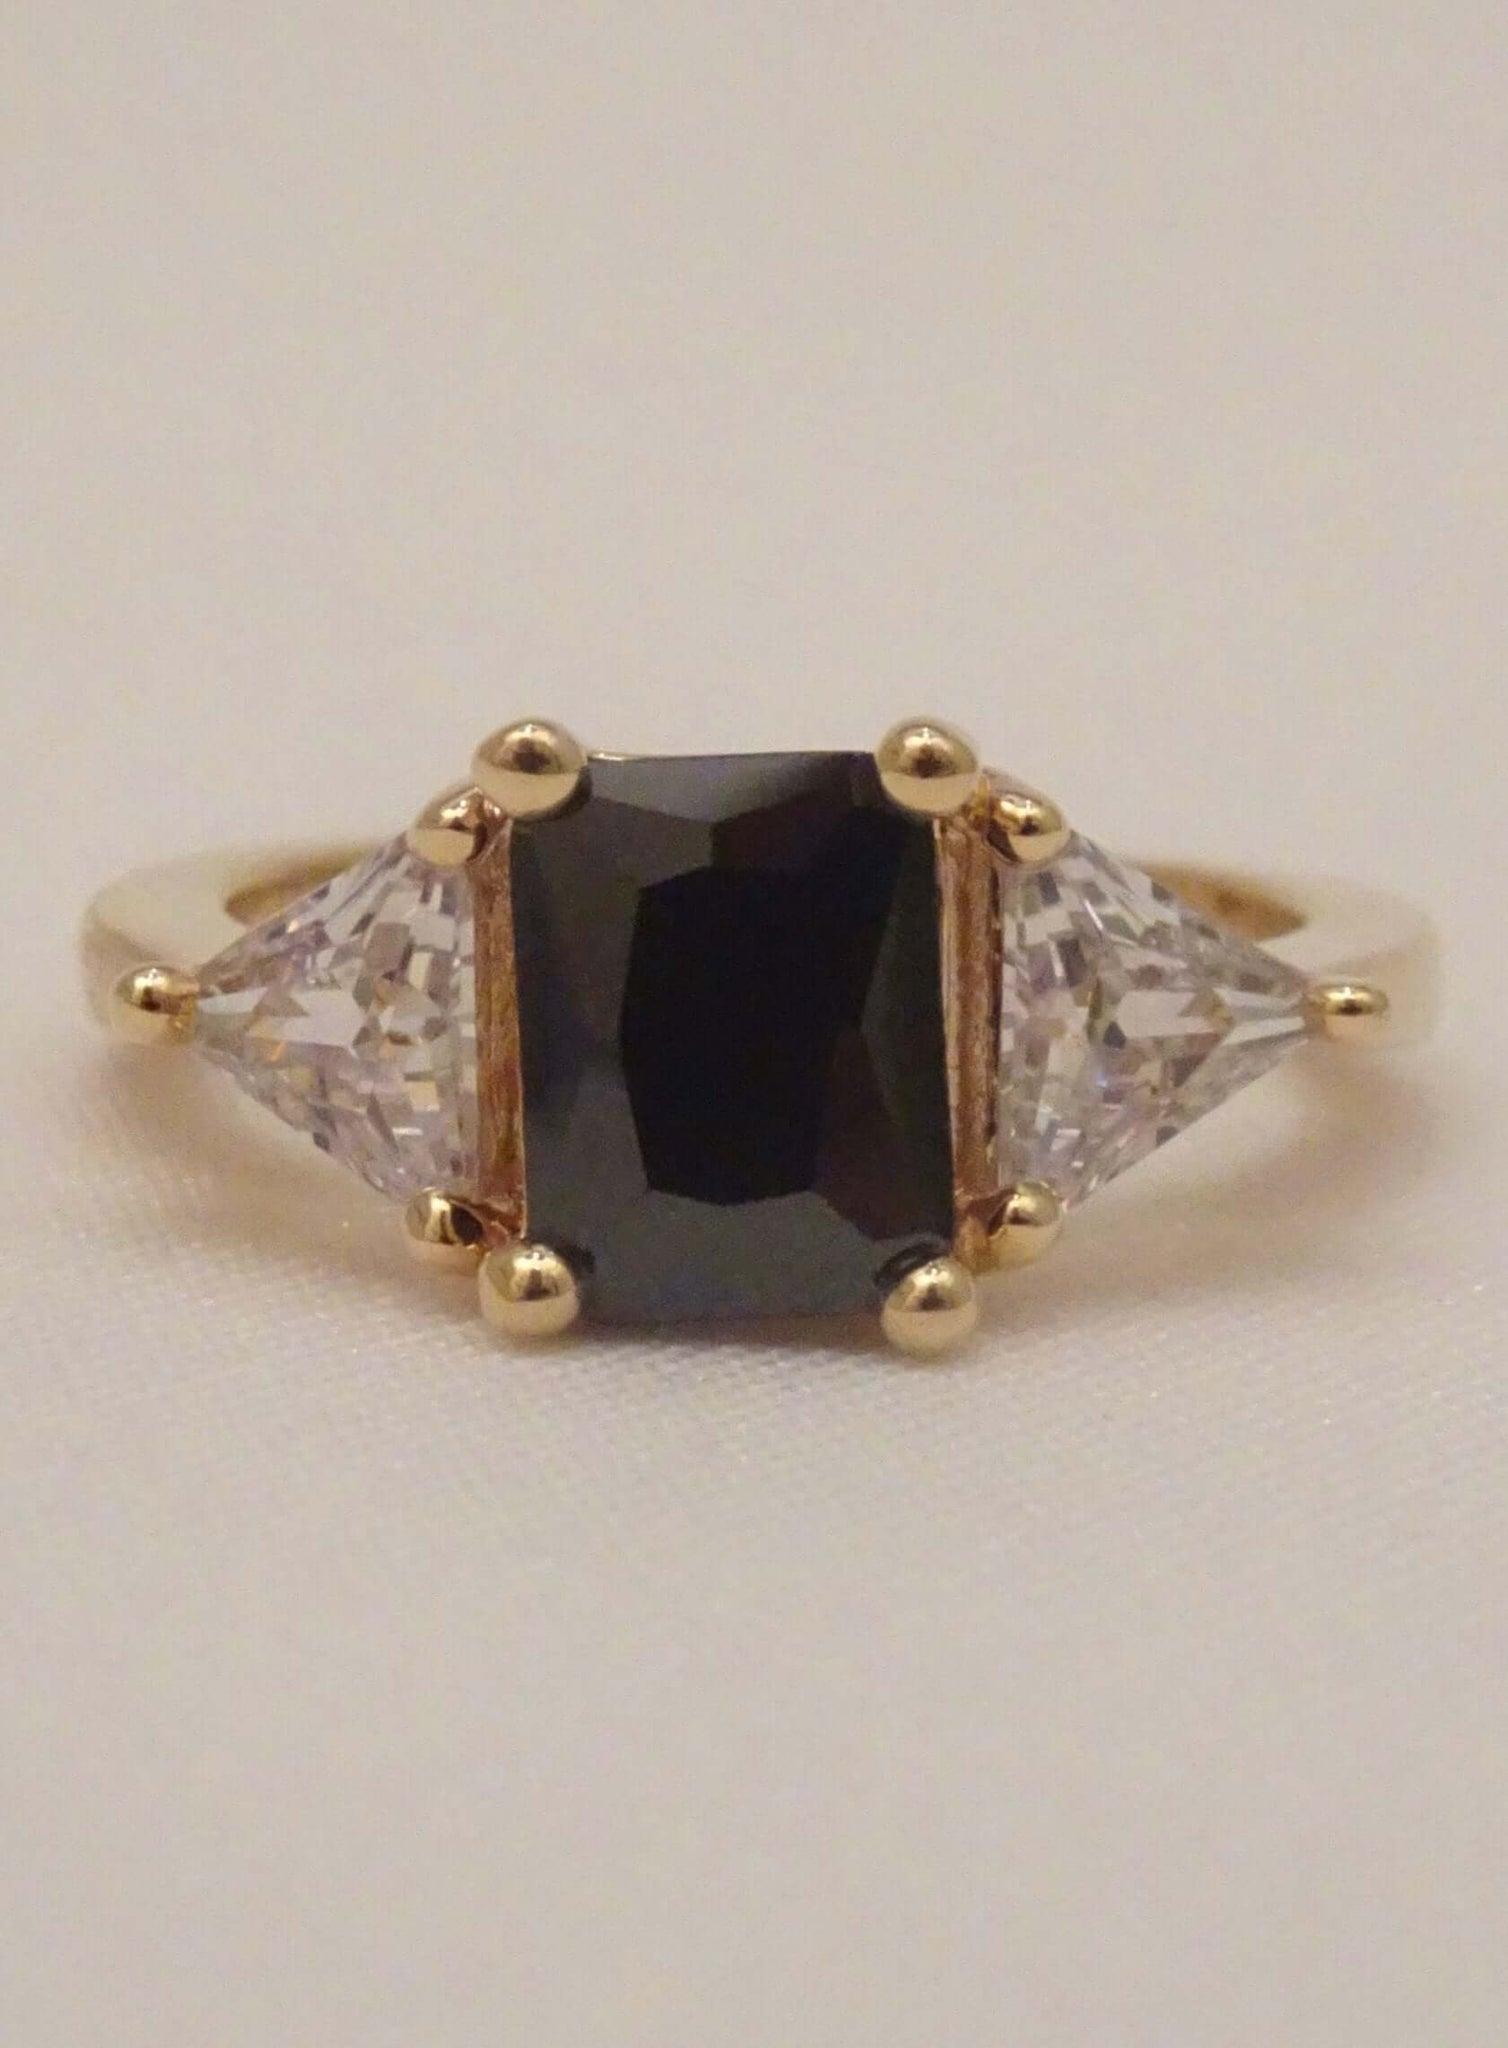 The Black Onyx Ring Sparrow